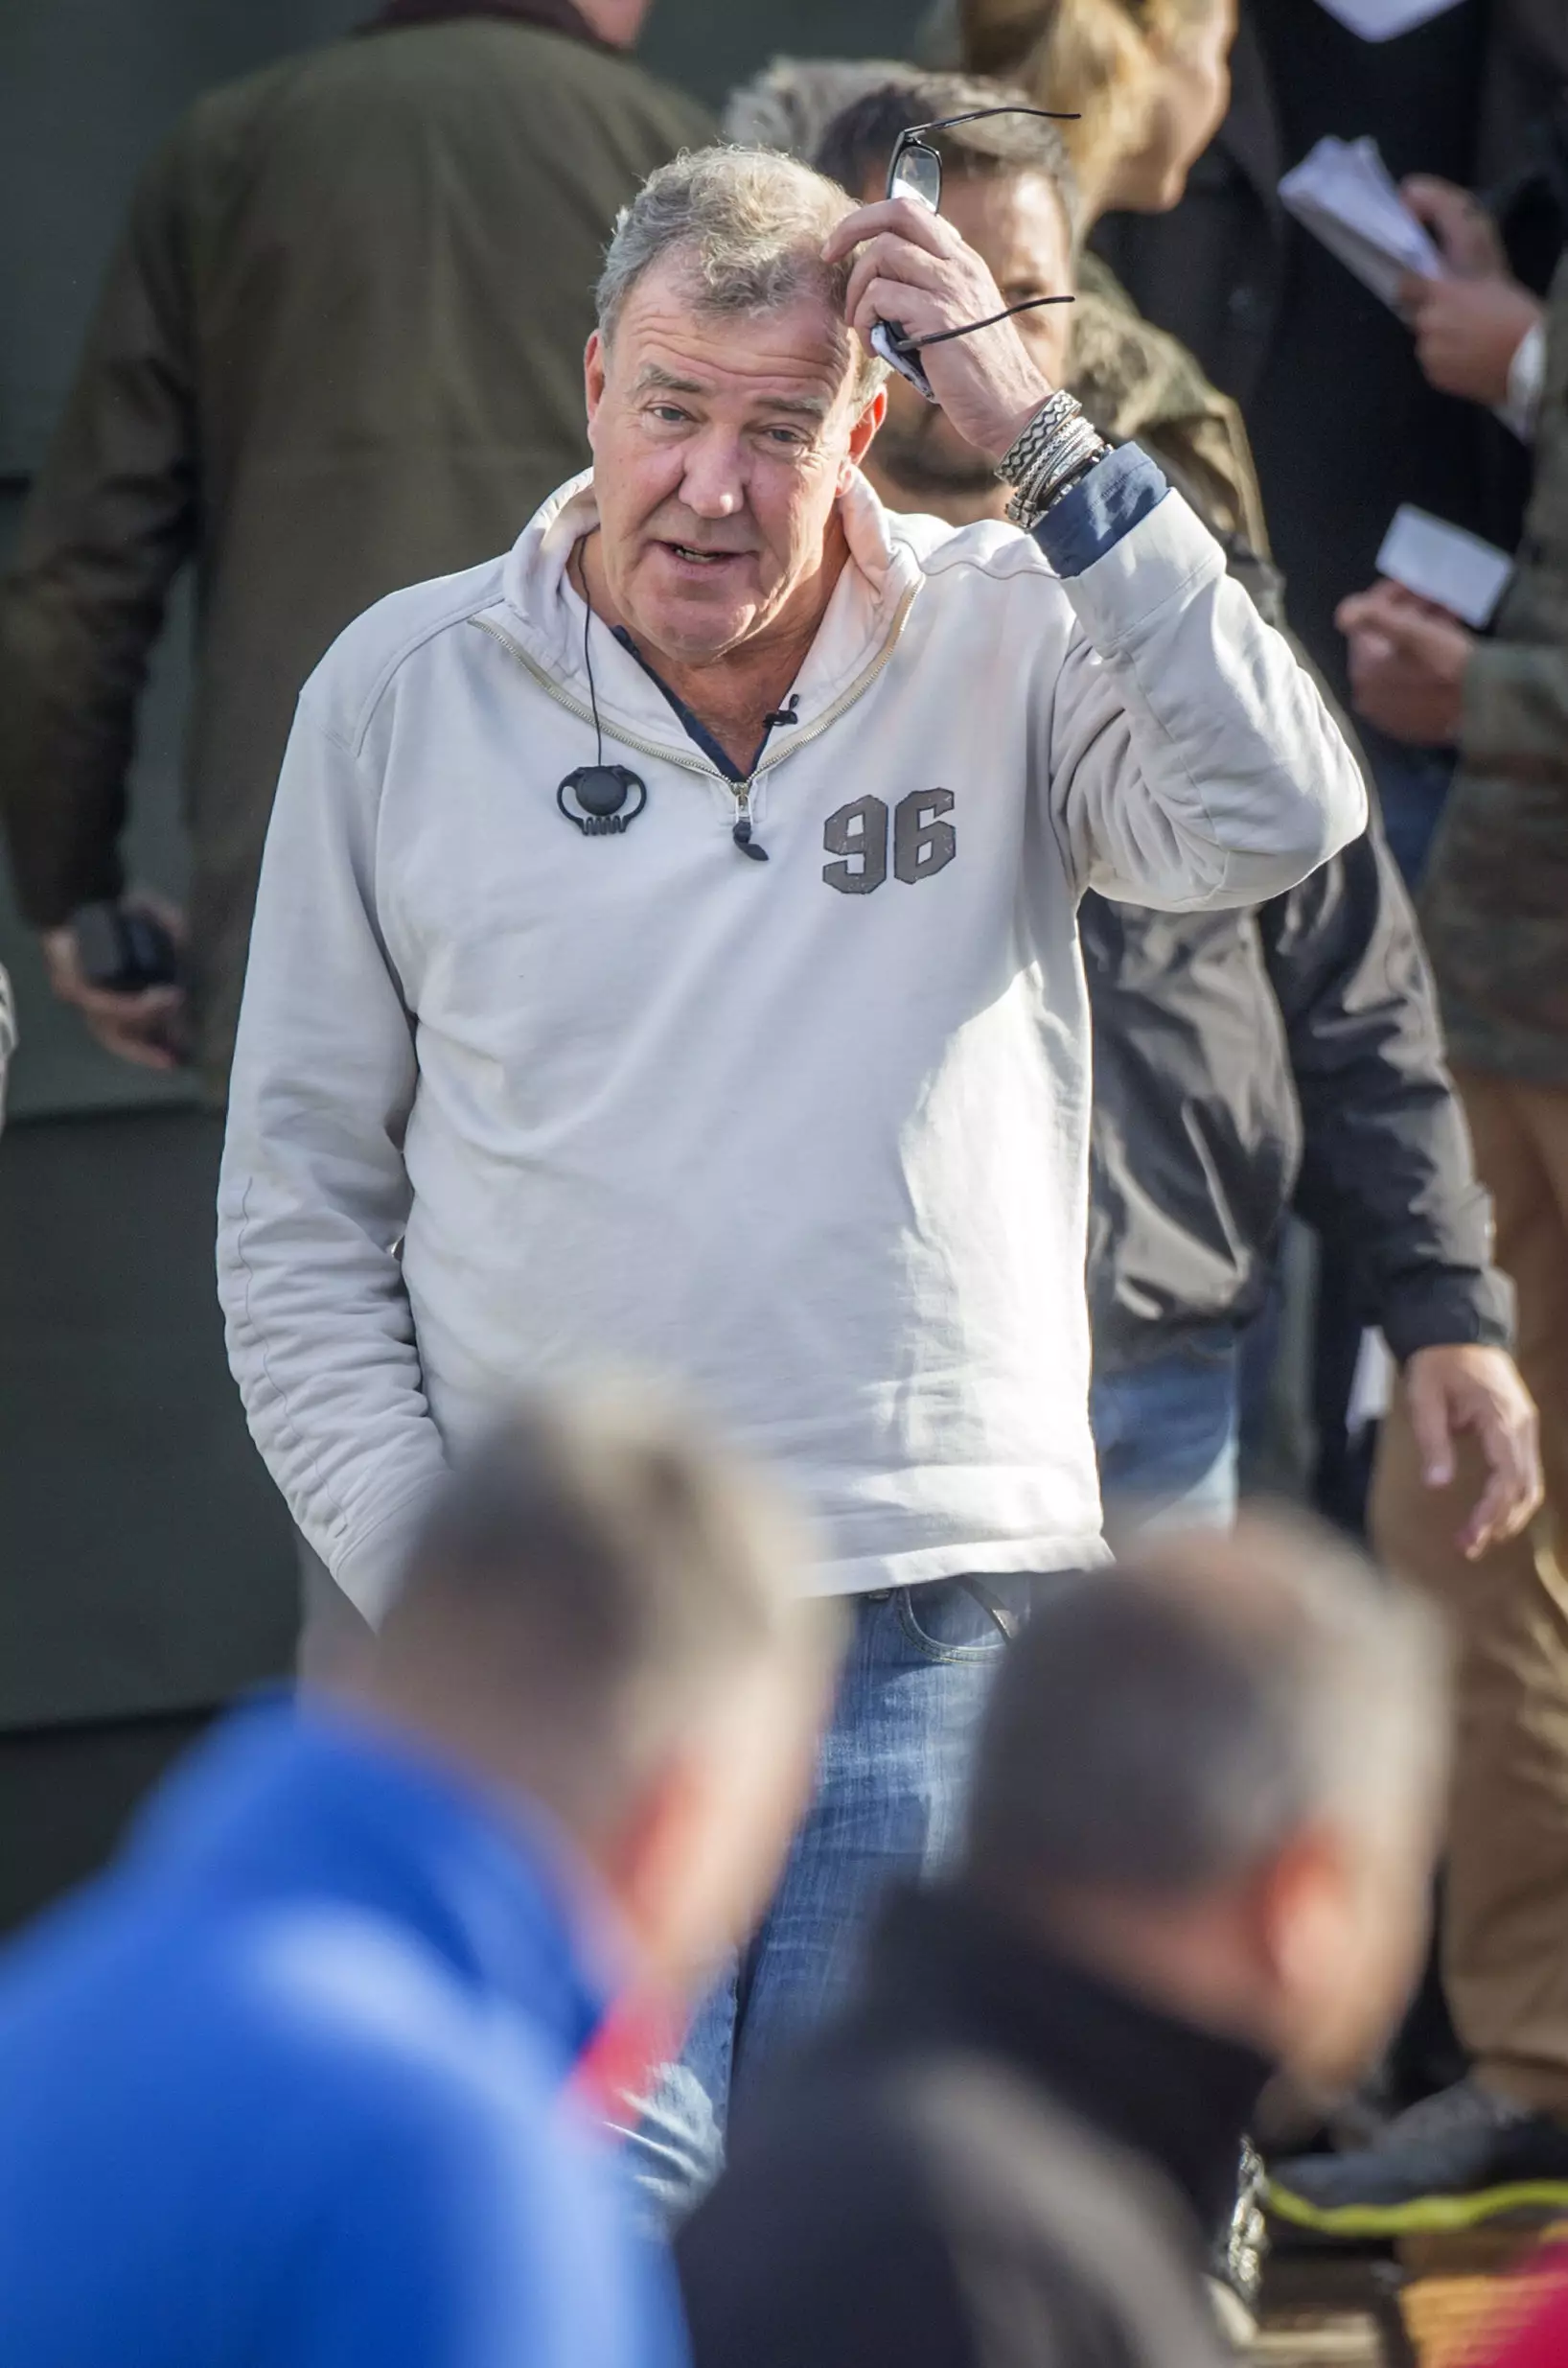 Clarkson on set of The Grand Tour in 2016.